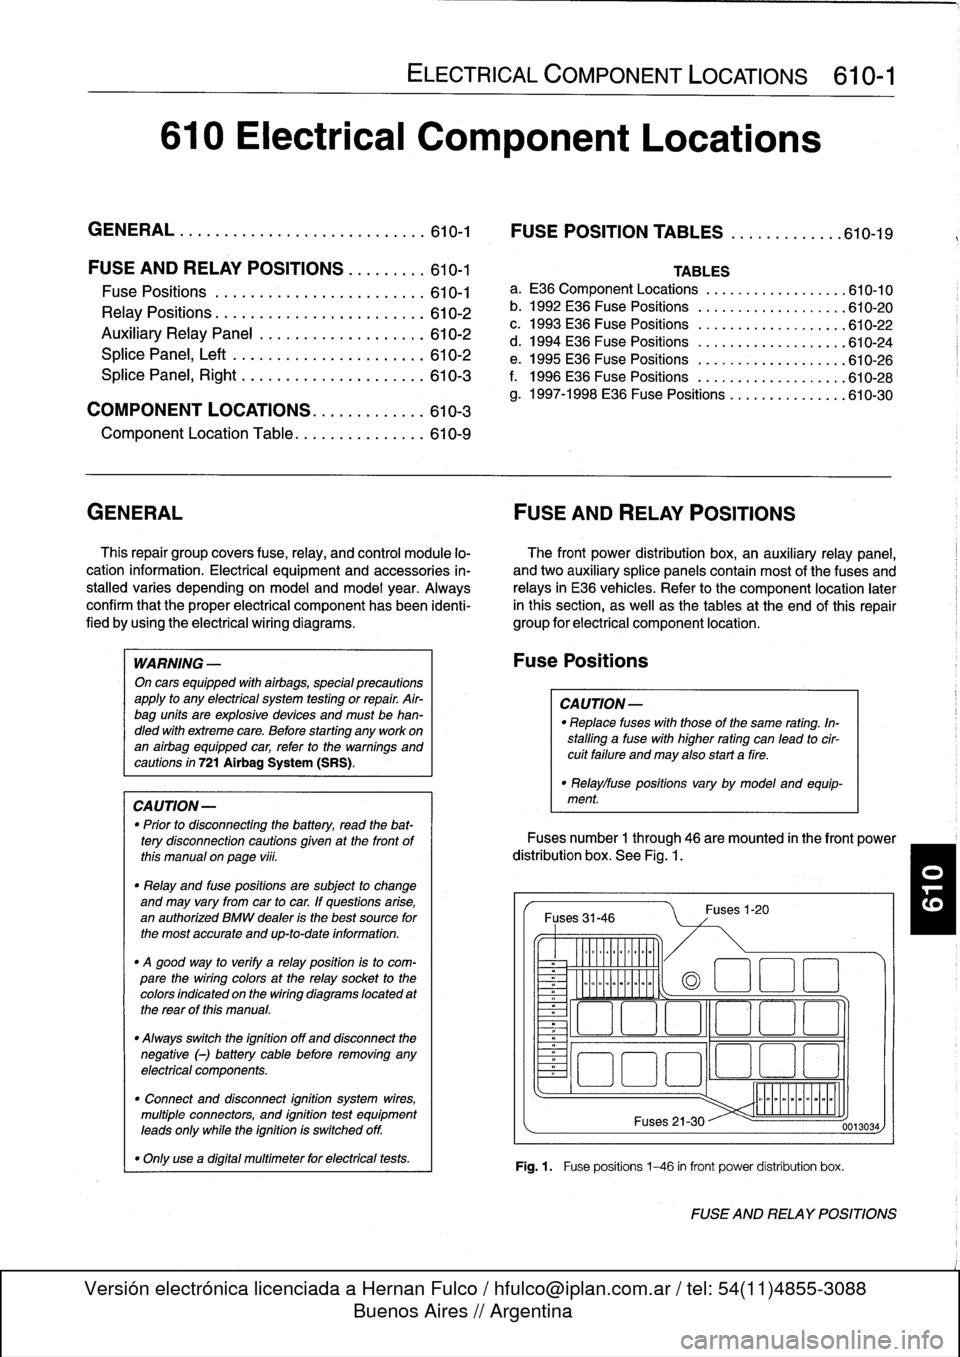 BMW 328i 1992 E36 Workshop Manual 
610
Electrical
Component
Locations

GENERAL
...........
.
.
.
.
.
.
.
.
.
........
610-1

	

FOSE
POSITION
TABLES
..
.
.
.
.
.
.....
.
610-19

FUSE
AND
RELAY
POSITIONS
.
...
.
.
.
.
.
610-1

Fuse
Pos